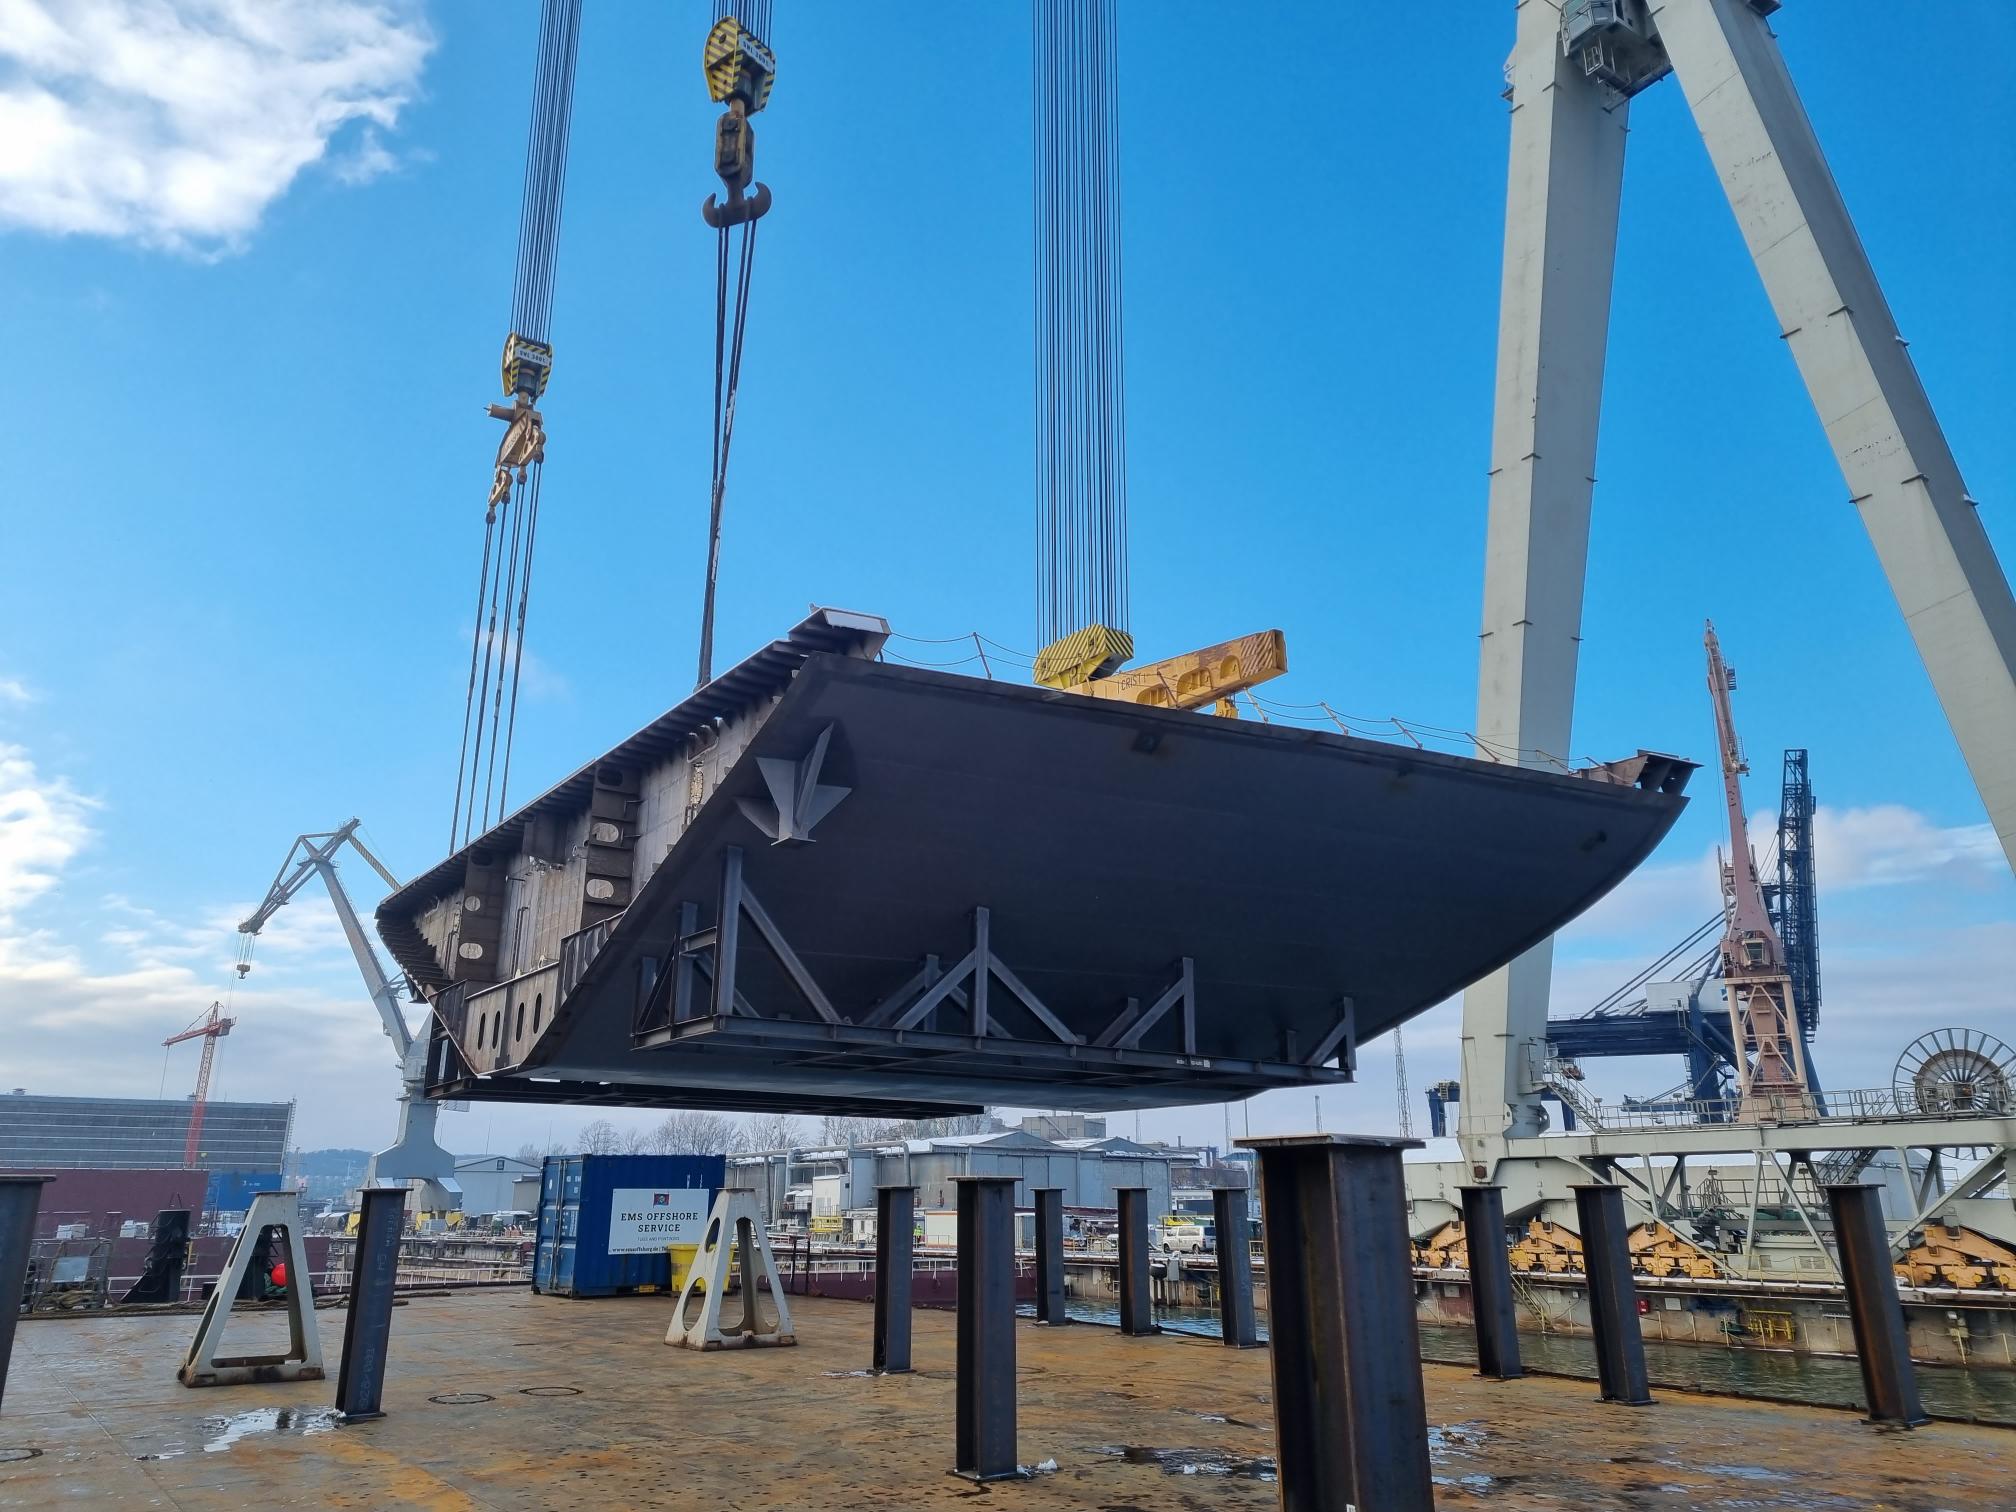 Hull section of a cruise ship is lifted from a pontoon with the help of a crane on board